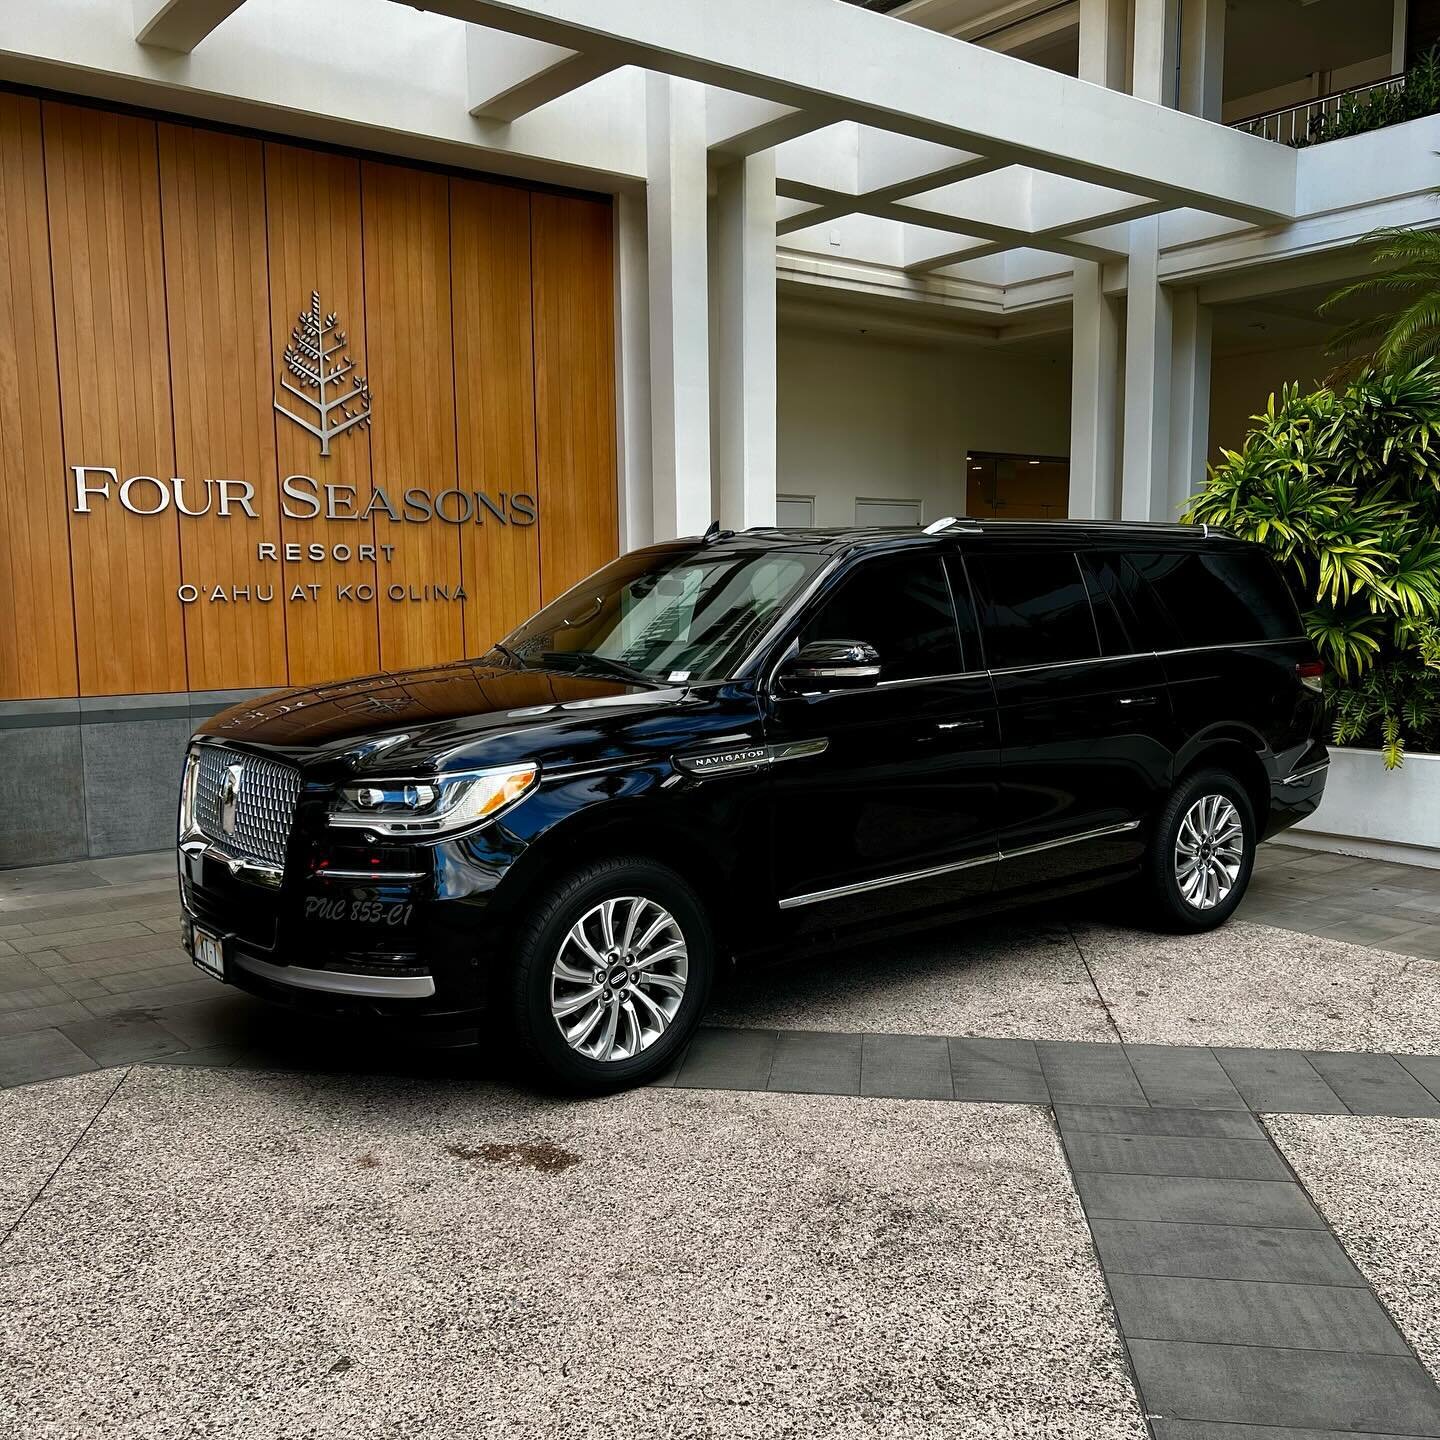 Picking up VIP clients today at Four Seasons Resort Oahu at Ko Olina and heading to the airport. Welcome to a beautiful morning in Honolulu Hawai&rsquo;i. Come ride with us! Mahalo for choosing Kanoa Transportation for your transportation needs.

#fo